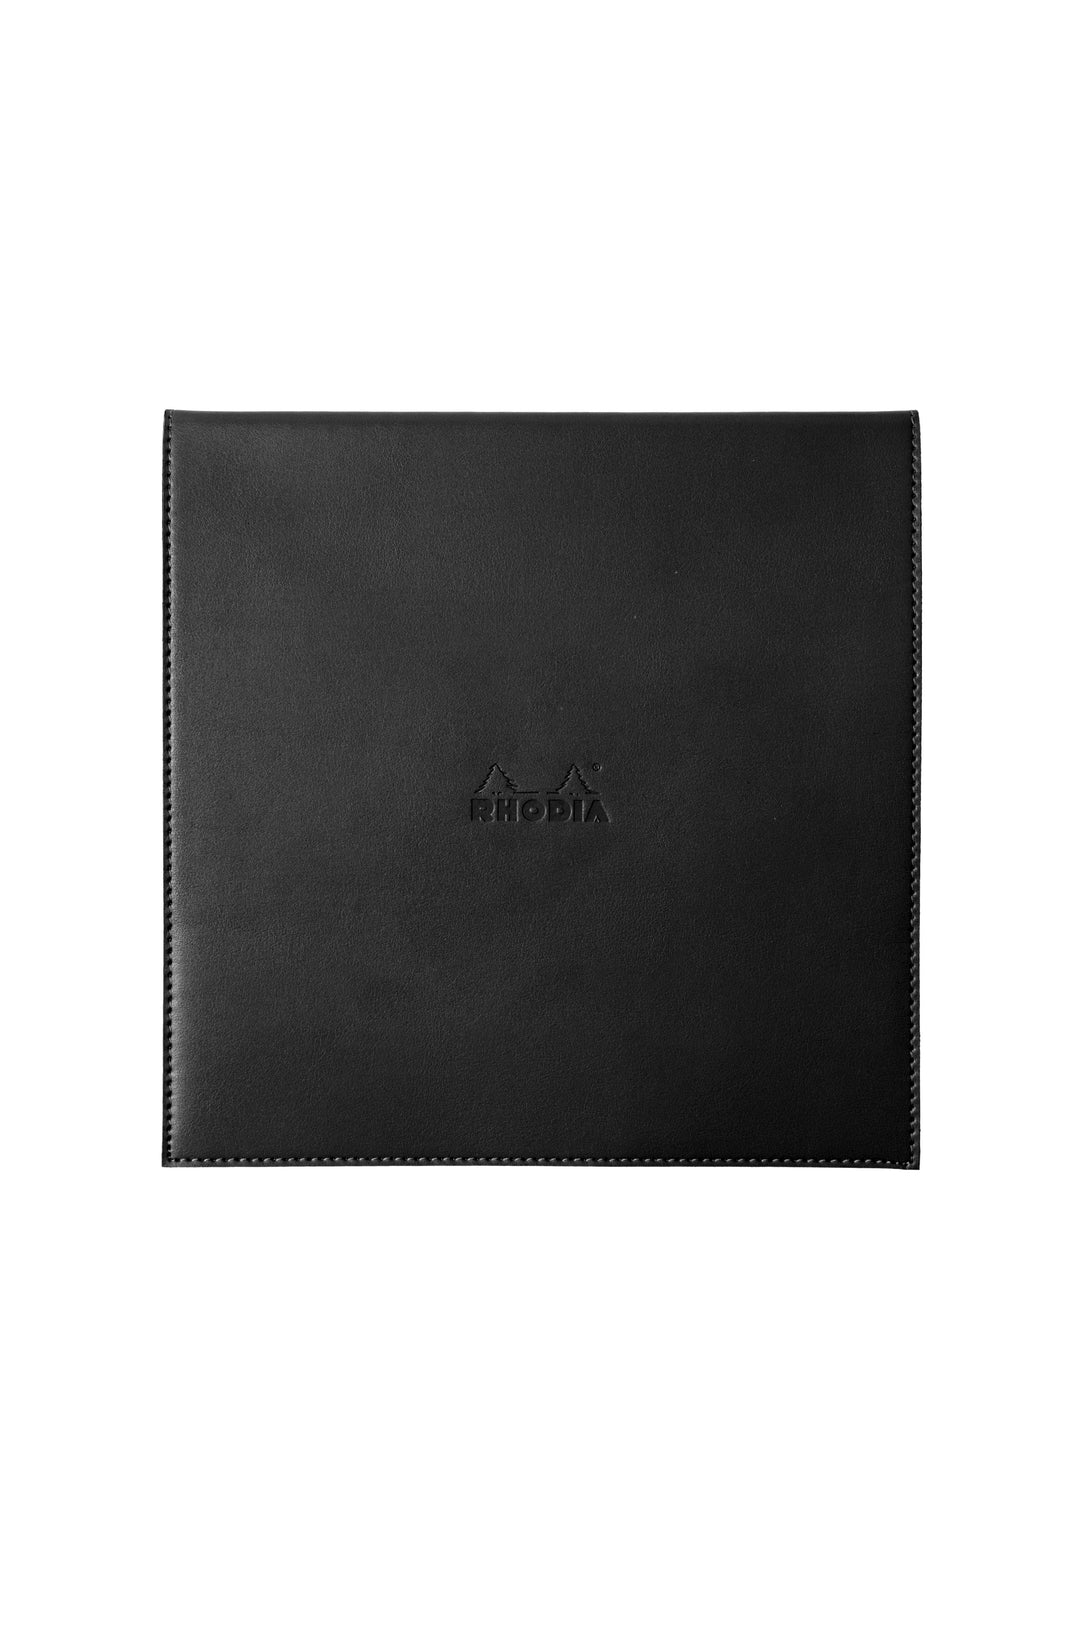 Rhodia Boutique Notepad Cover with Square Ruled Notepad - 220 mm x 220 mm